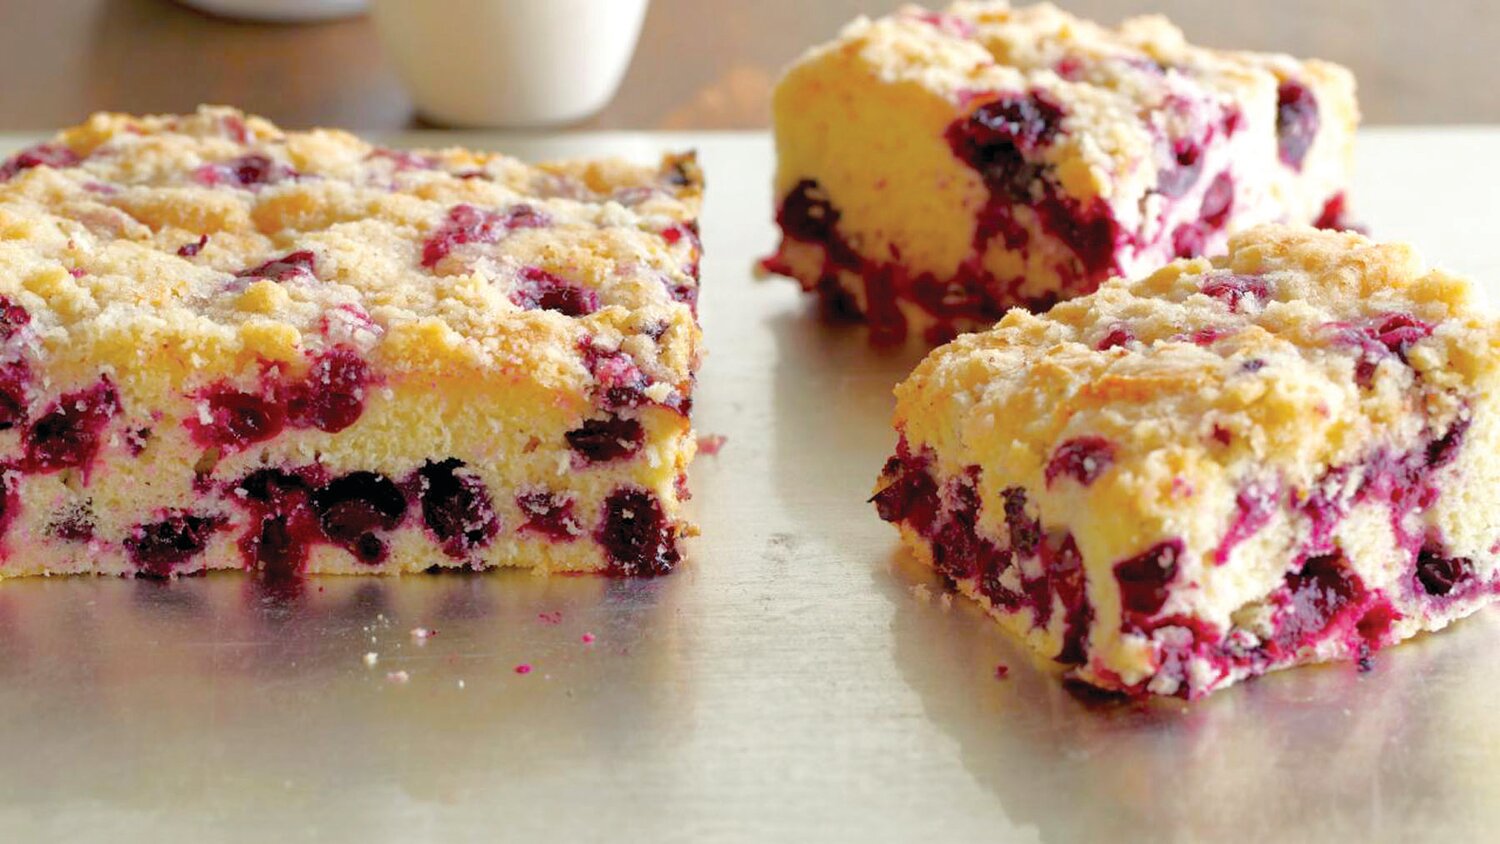 Lots of fresh blueberries now in season add flavor and nutrition to this blueberry buckle, a simple American dessert.